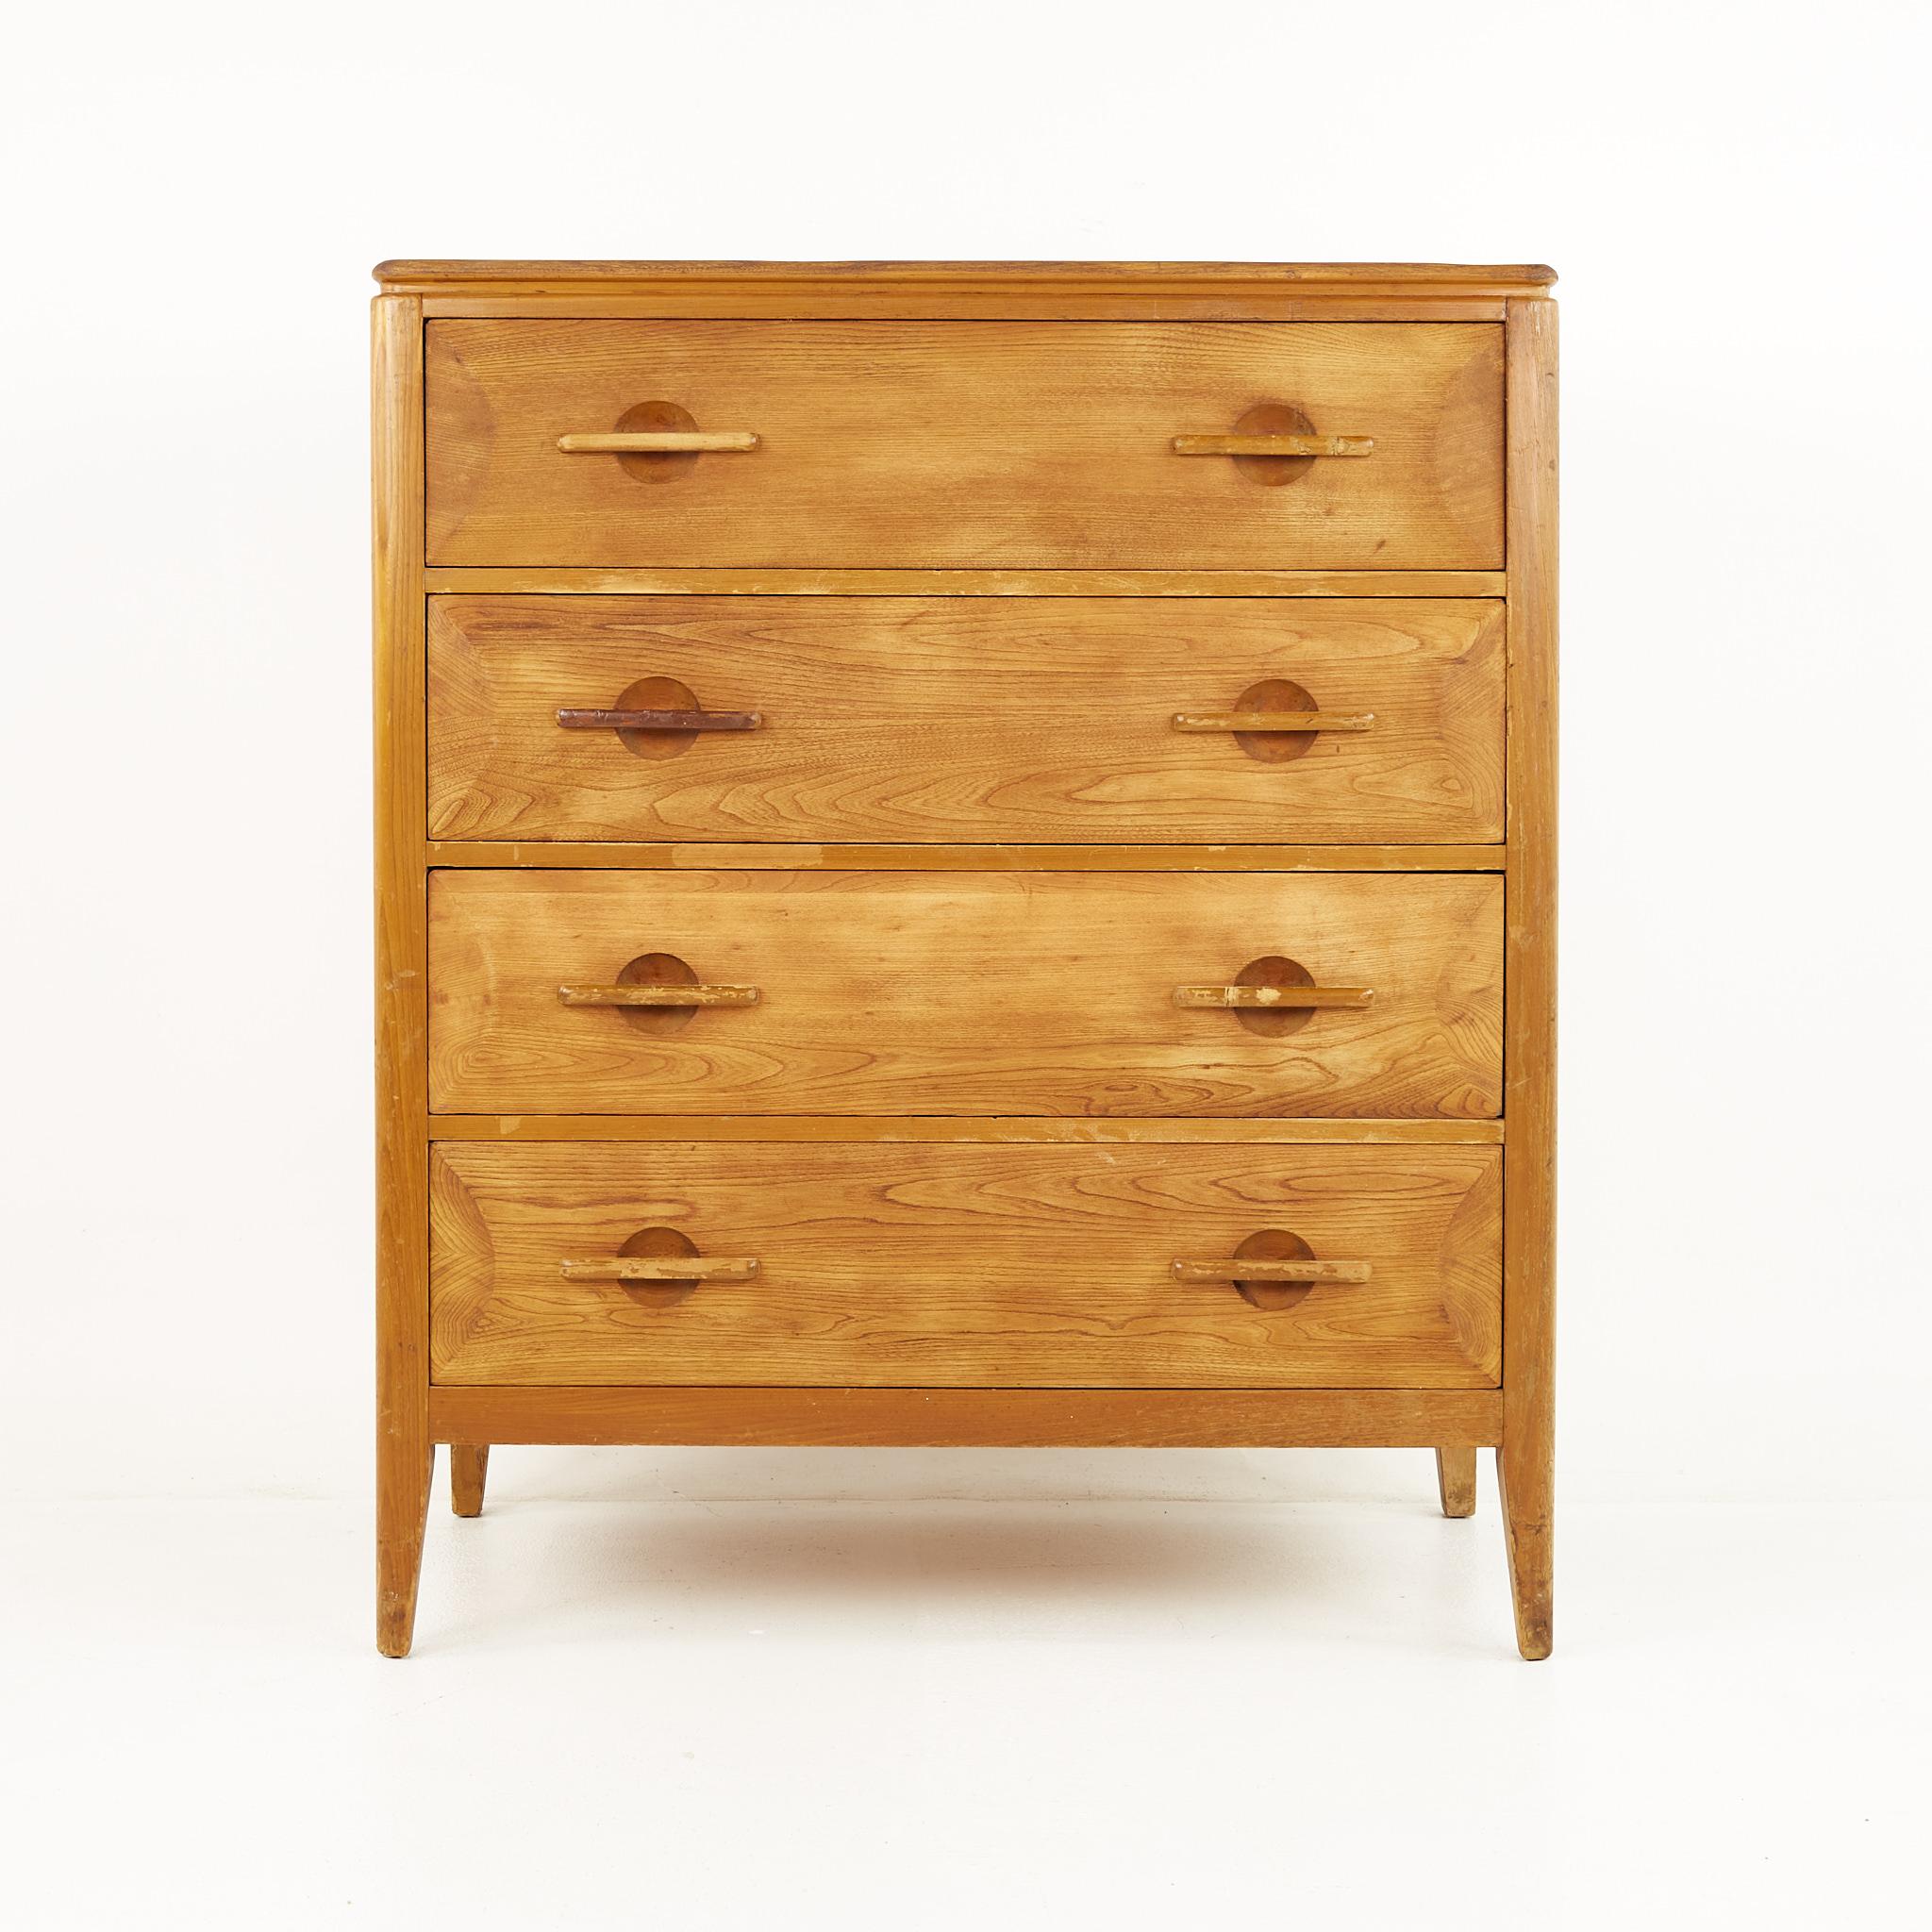 John Widdicomb Mid Century Oak 5 drawer highboy dresser

The dresser measures: 36 wide x 20 deep x 42.5 inches high

All pieces of furniture can be had in what we call restored vintage condition. That means the piece is restored upon purchase so